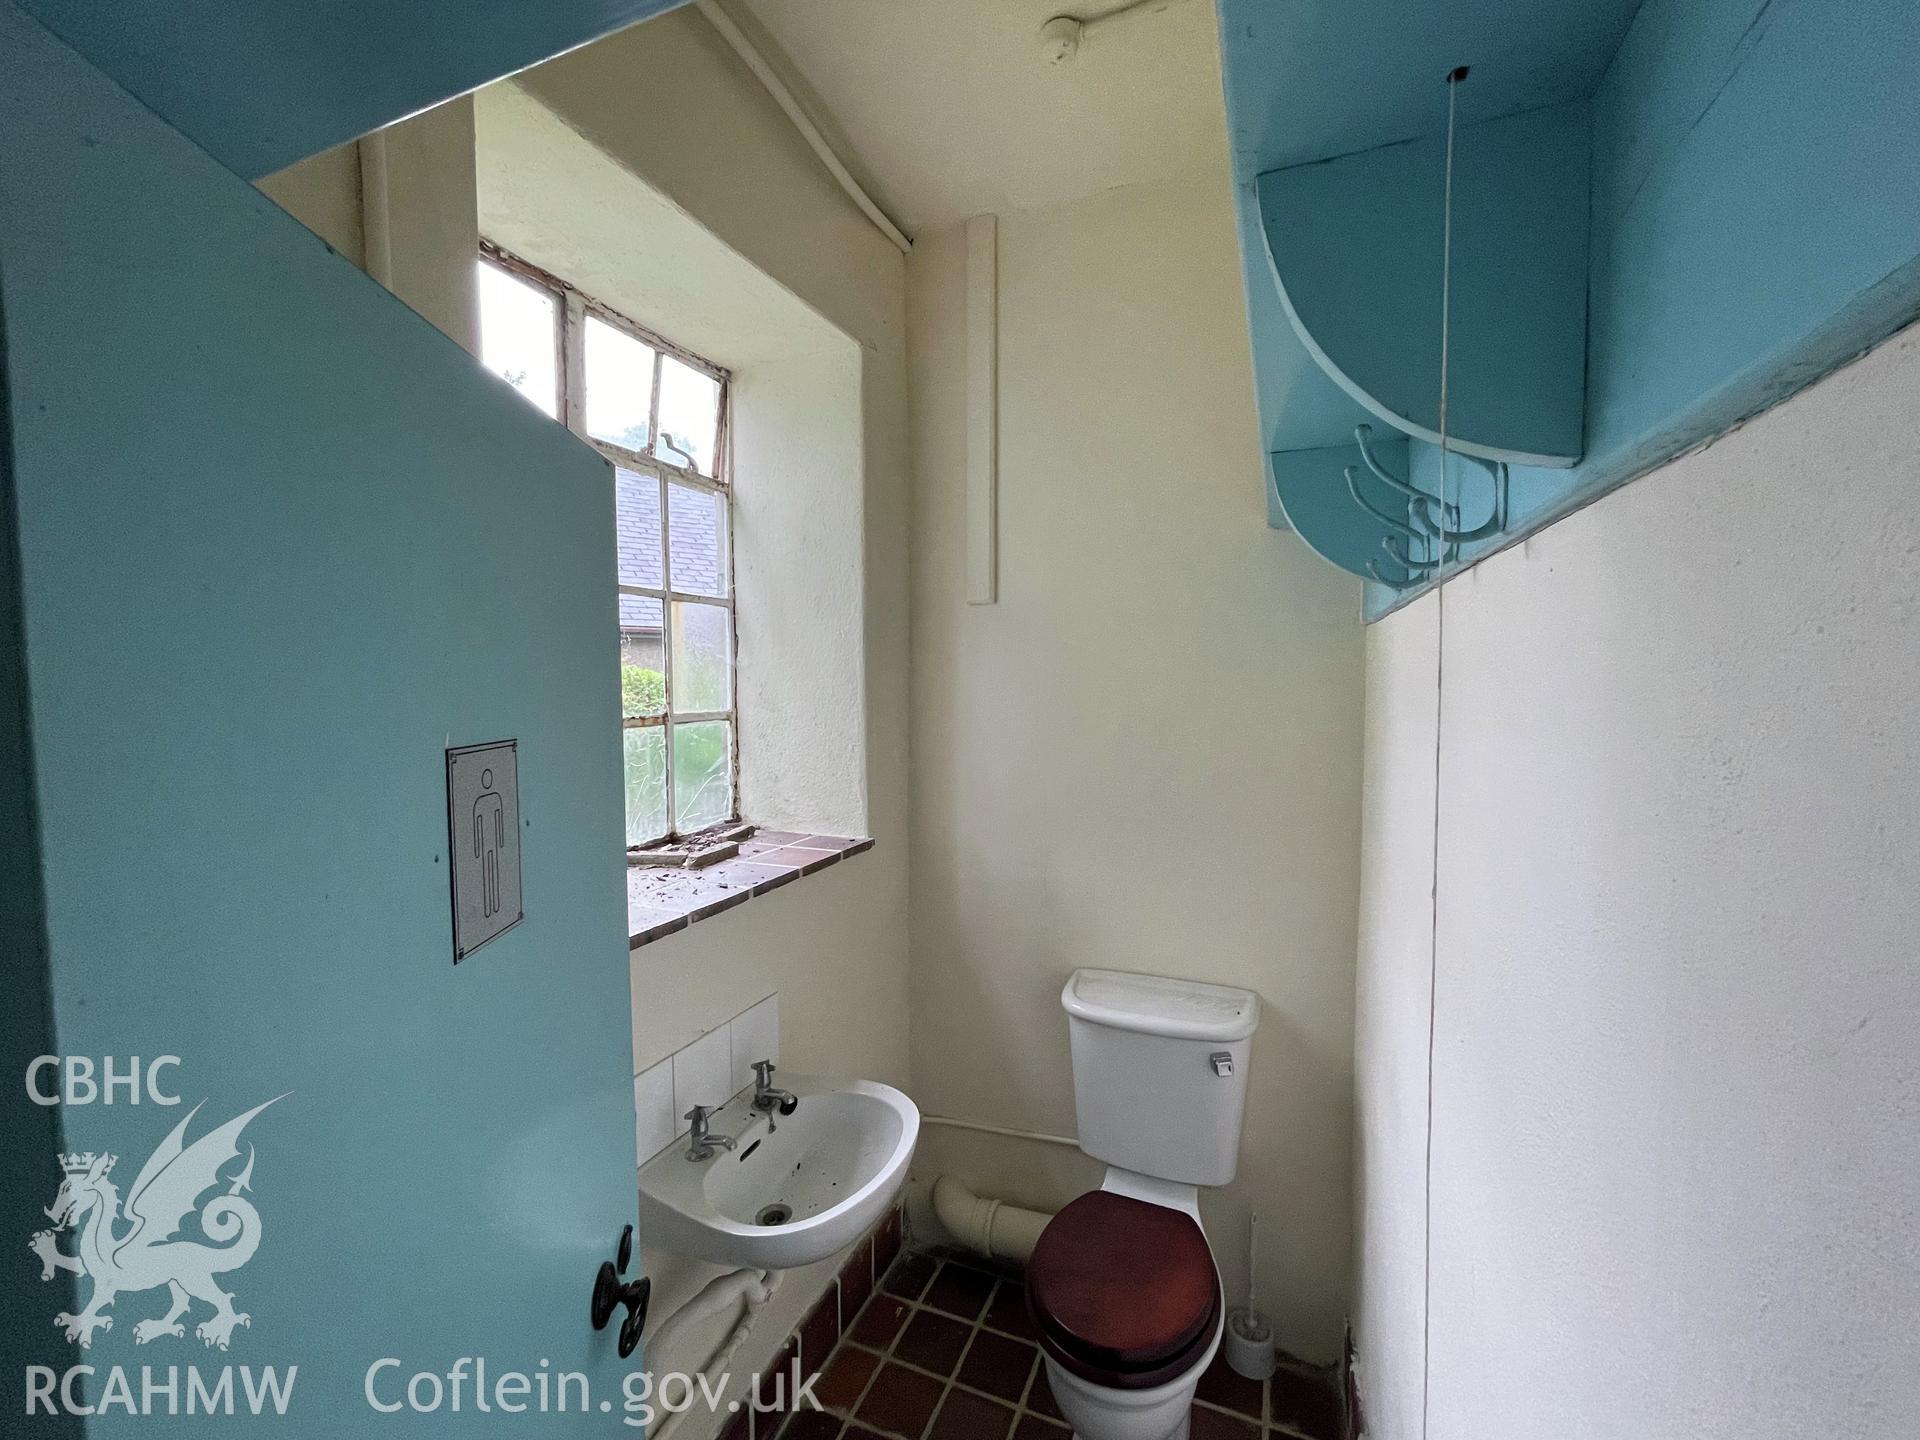 Colour photograph showing male lavatory facing west  - part of a photographic record relating to Moriah Chapel, Llanystumdwy, produced as a condition of planning consent (Planning Reference C21/0420/41/LL; Gwynedd Council).